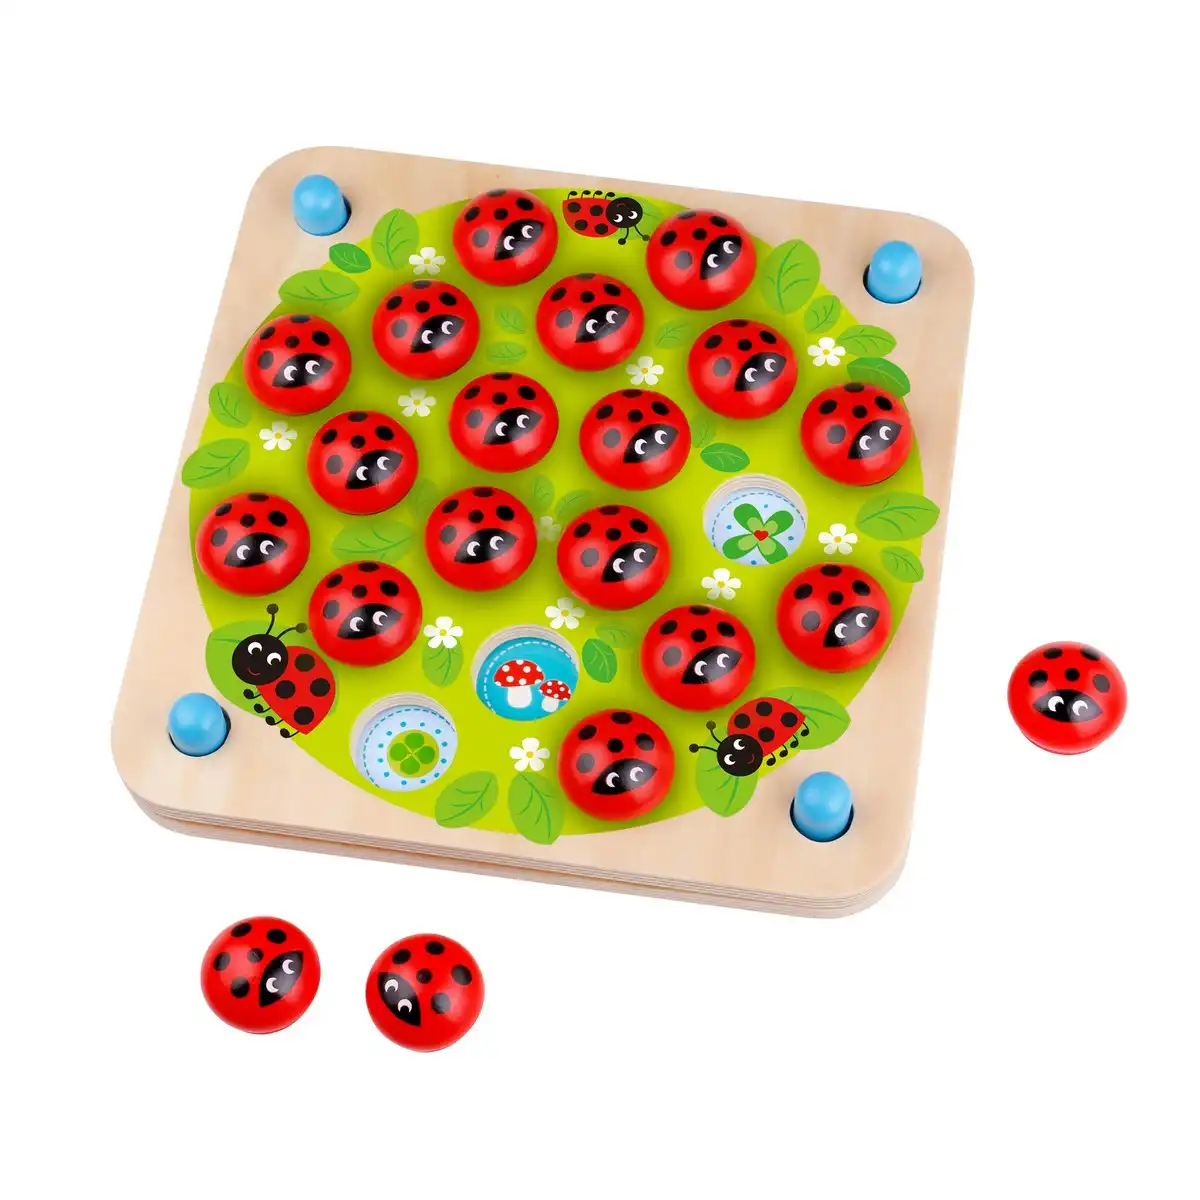 Tooky Toy Ladybug Educational Children's Memory Tabletop Matching Game 3y+